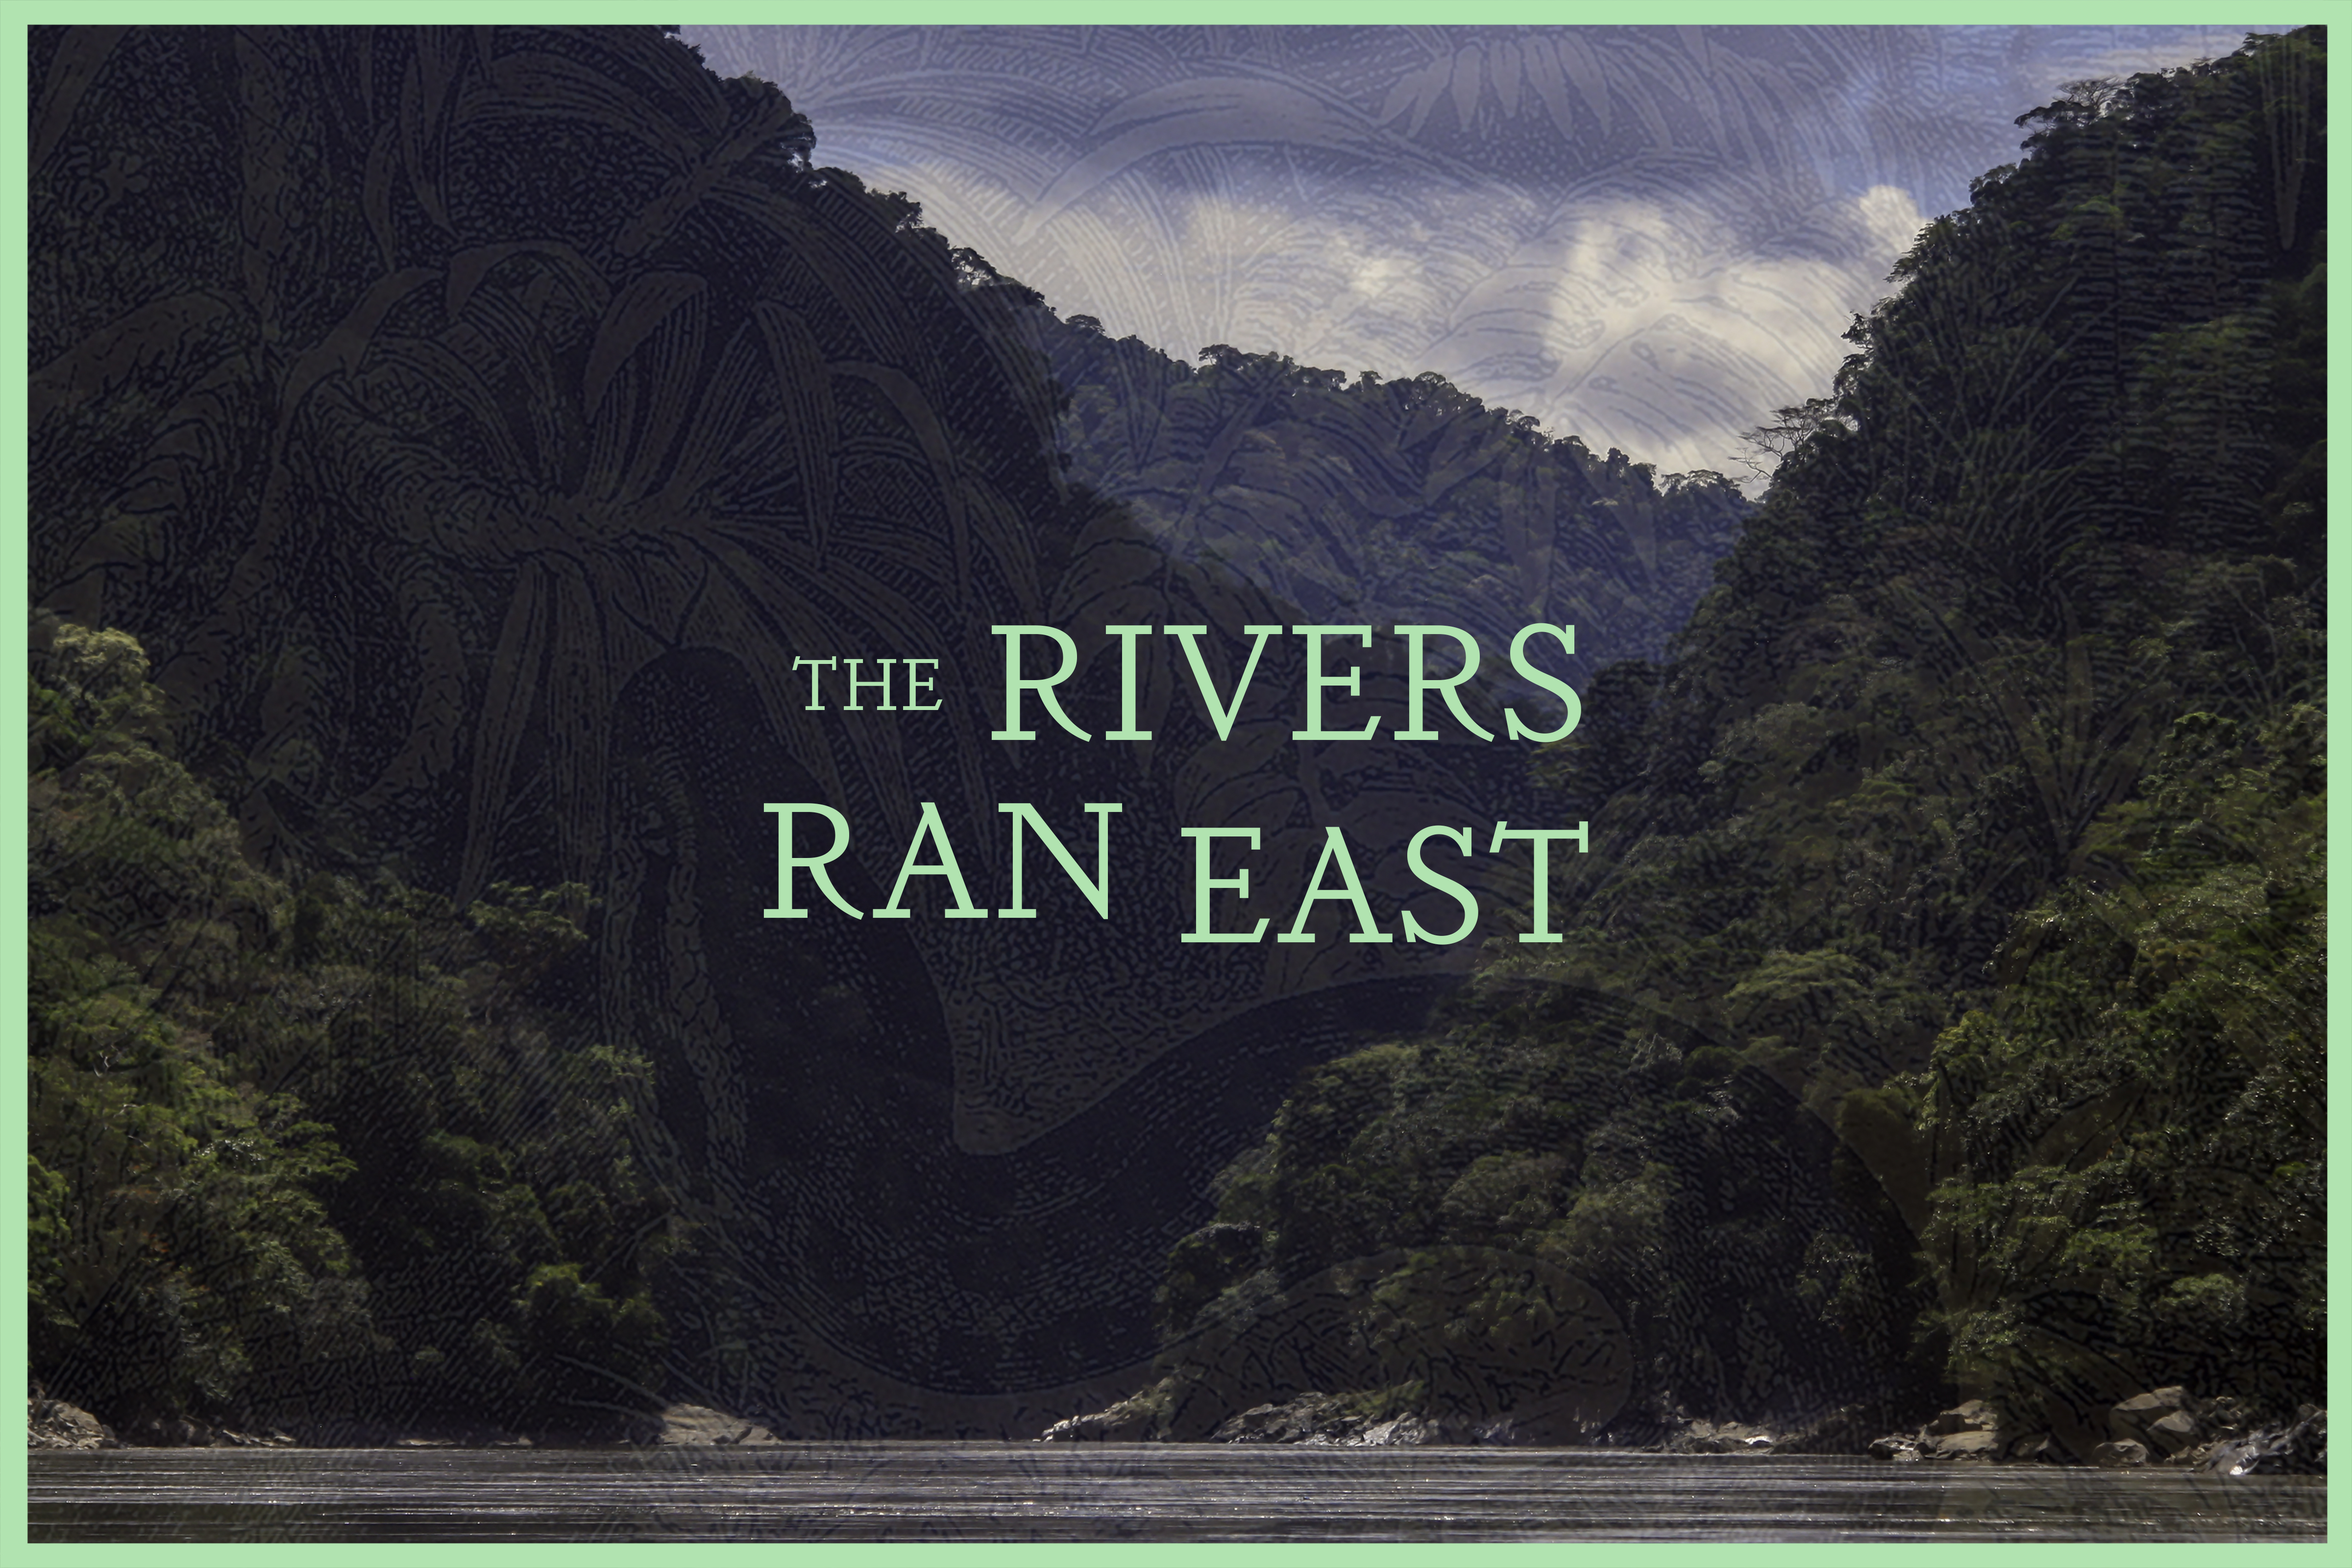 In 1947, former OSS agent, retired US Army Colonel, and explorer Leonard Clark, came into possession of a secret map that led him to 7 ancient cities of gold deep in the Amazon jungle of Peru. Despite being chronicled in his book, The Rivers Ran East, has anyone tried to confirm this historical discovery? Our Quest: To retrace Leonard Clark's route along the Maranon River in Northern Peru, confirm his claims, and find these ancient ruins.